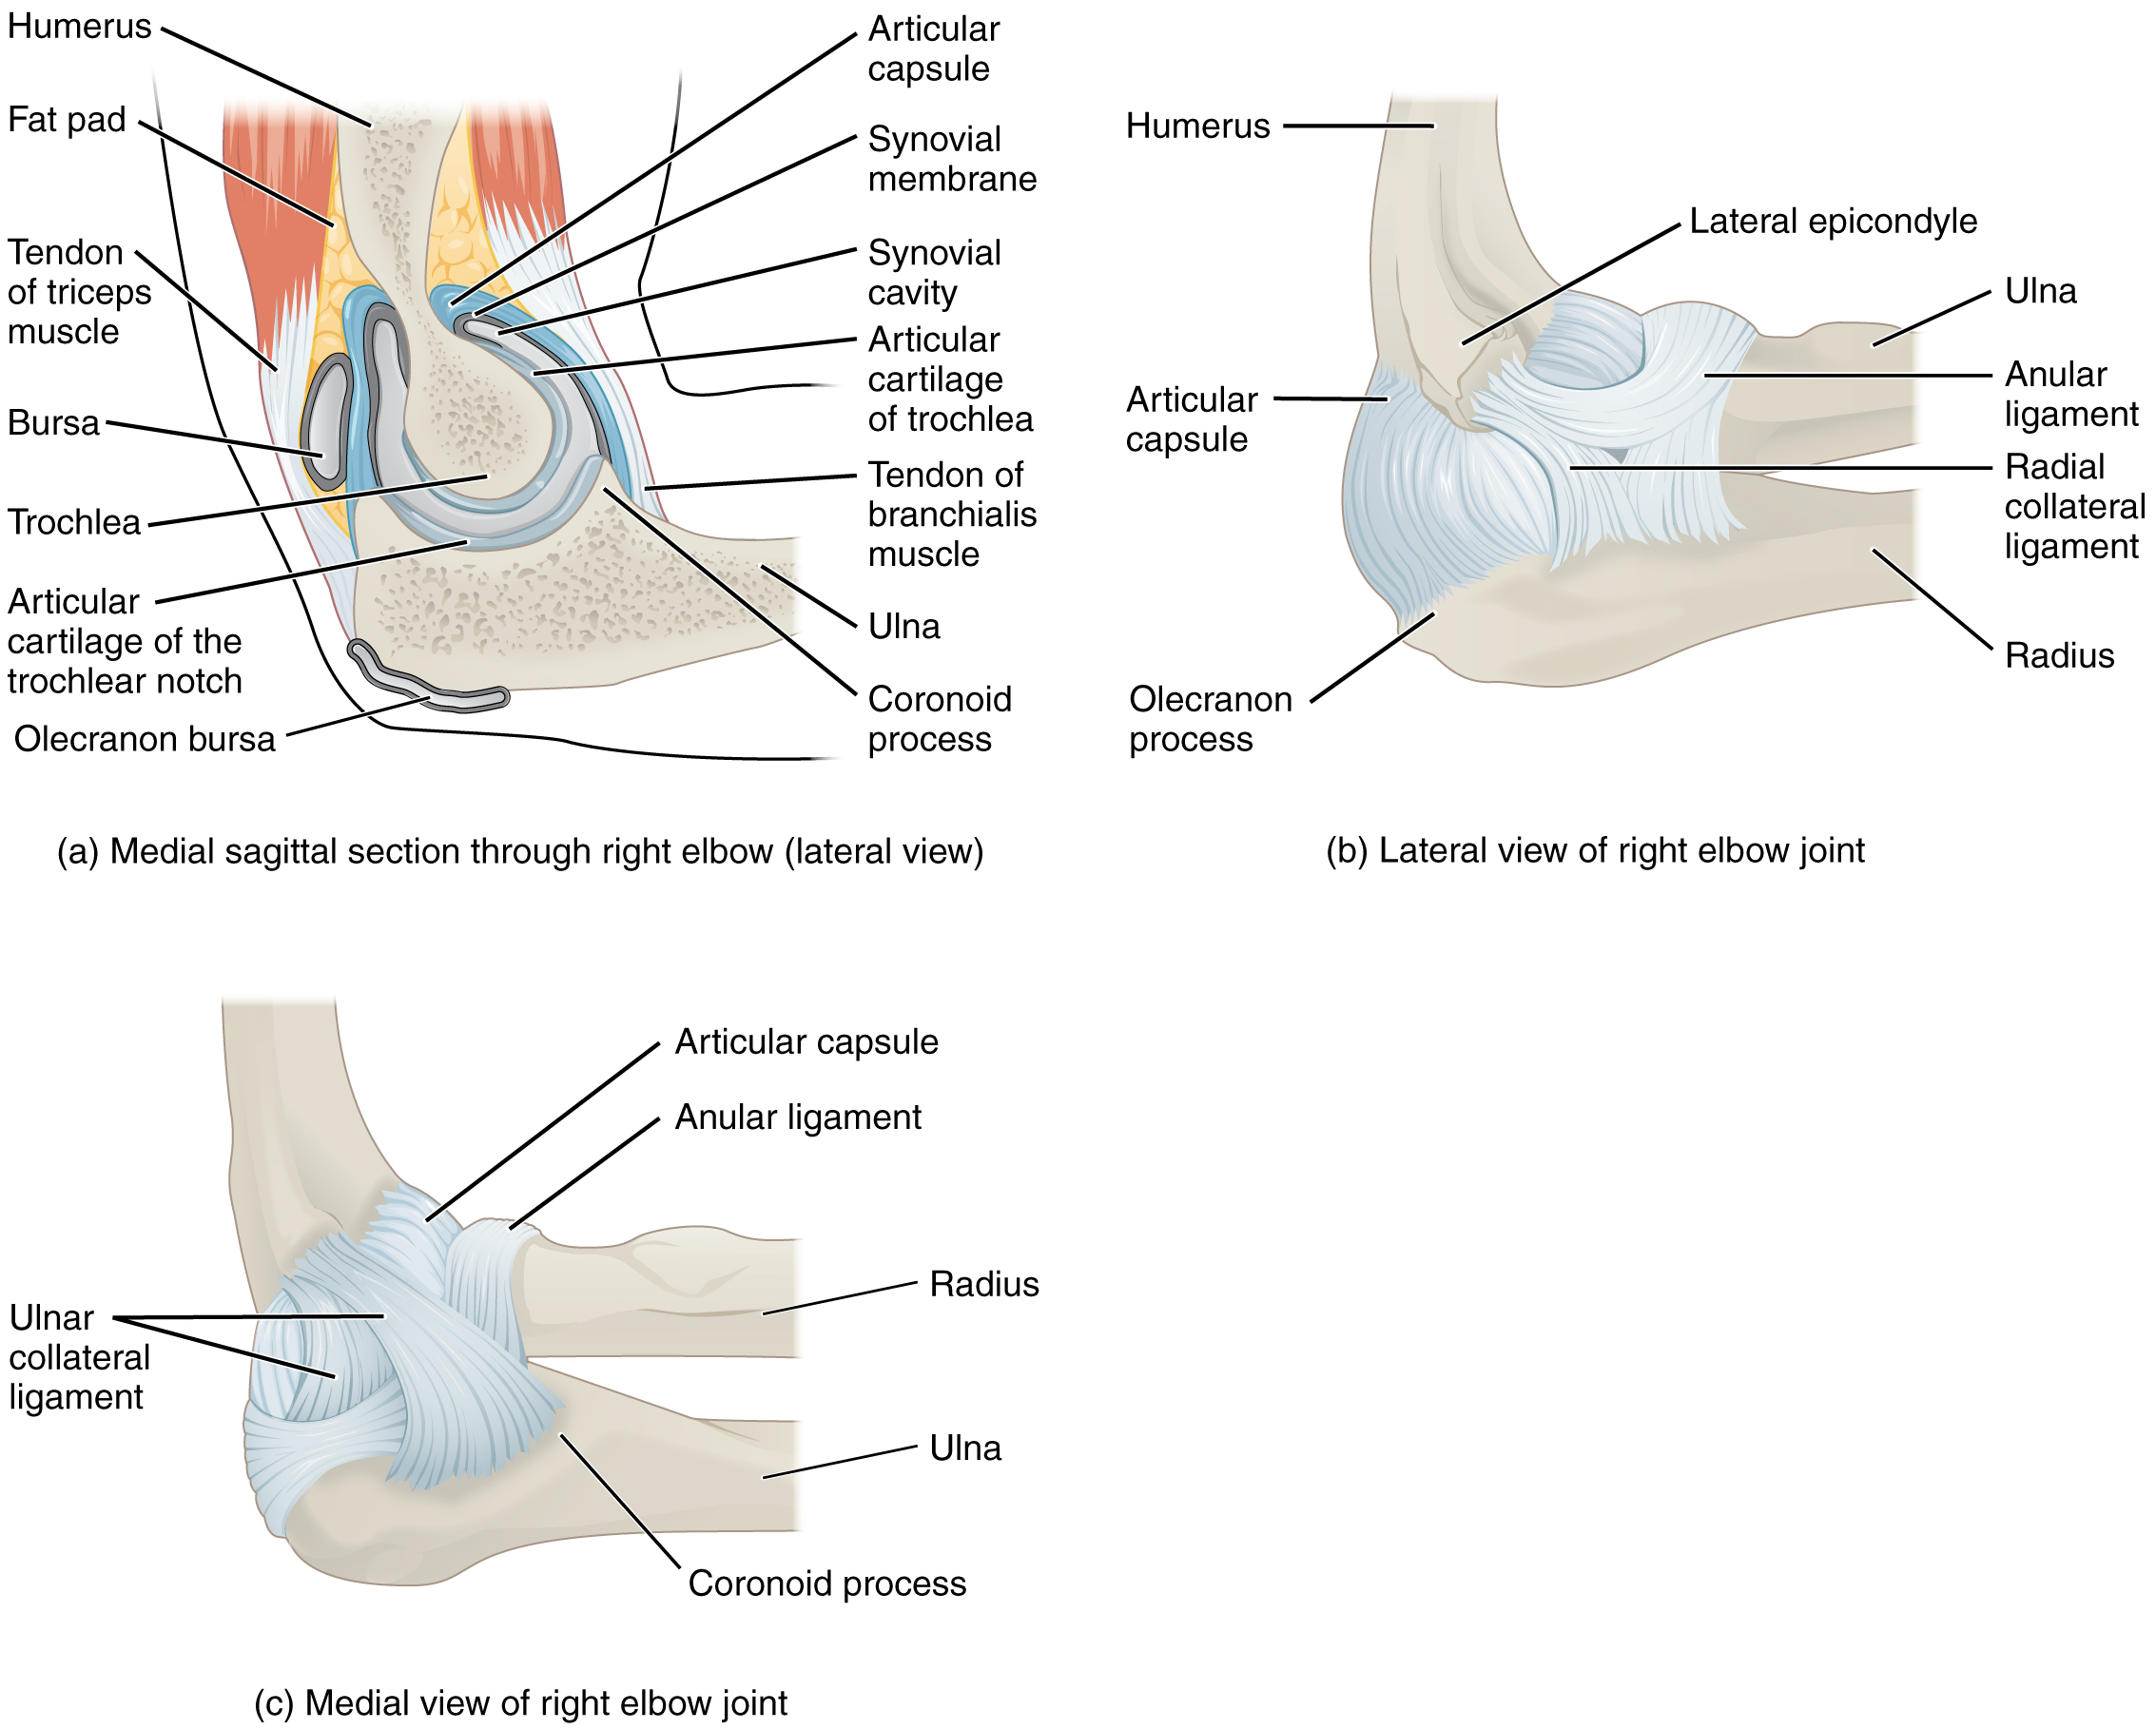 This figure shows the structure of the elbow joint. The top, left panel shows the medial sagittal section of the right elbow joint. The top, right panel shows the lateral view of the right elbow joint, and the bottom, left panel shows the medial view of the right elbow joint.